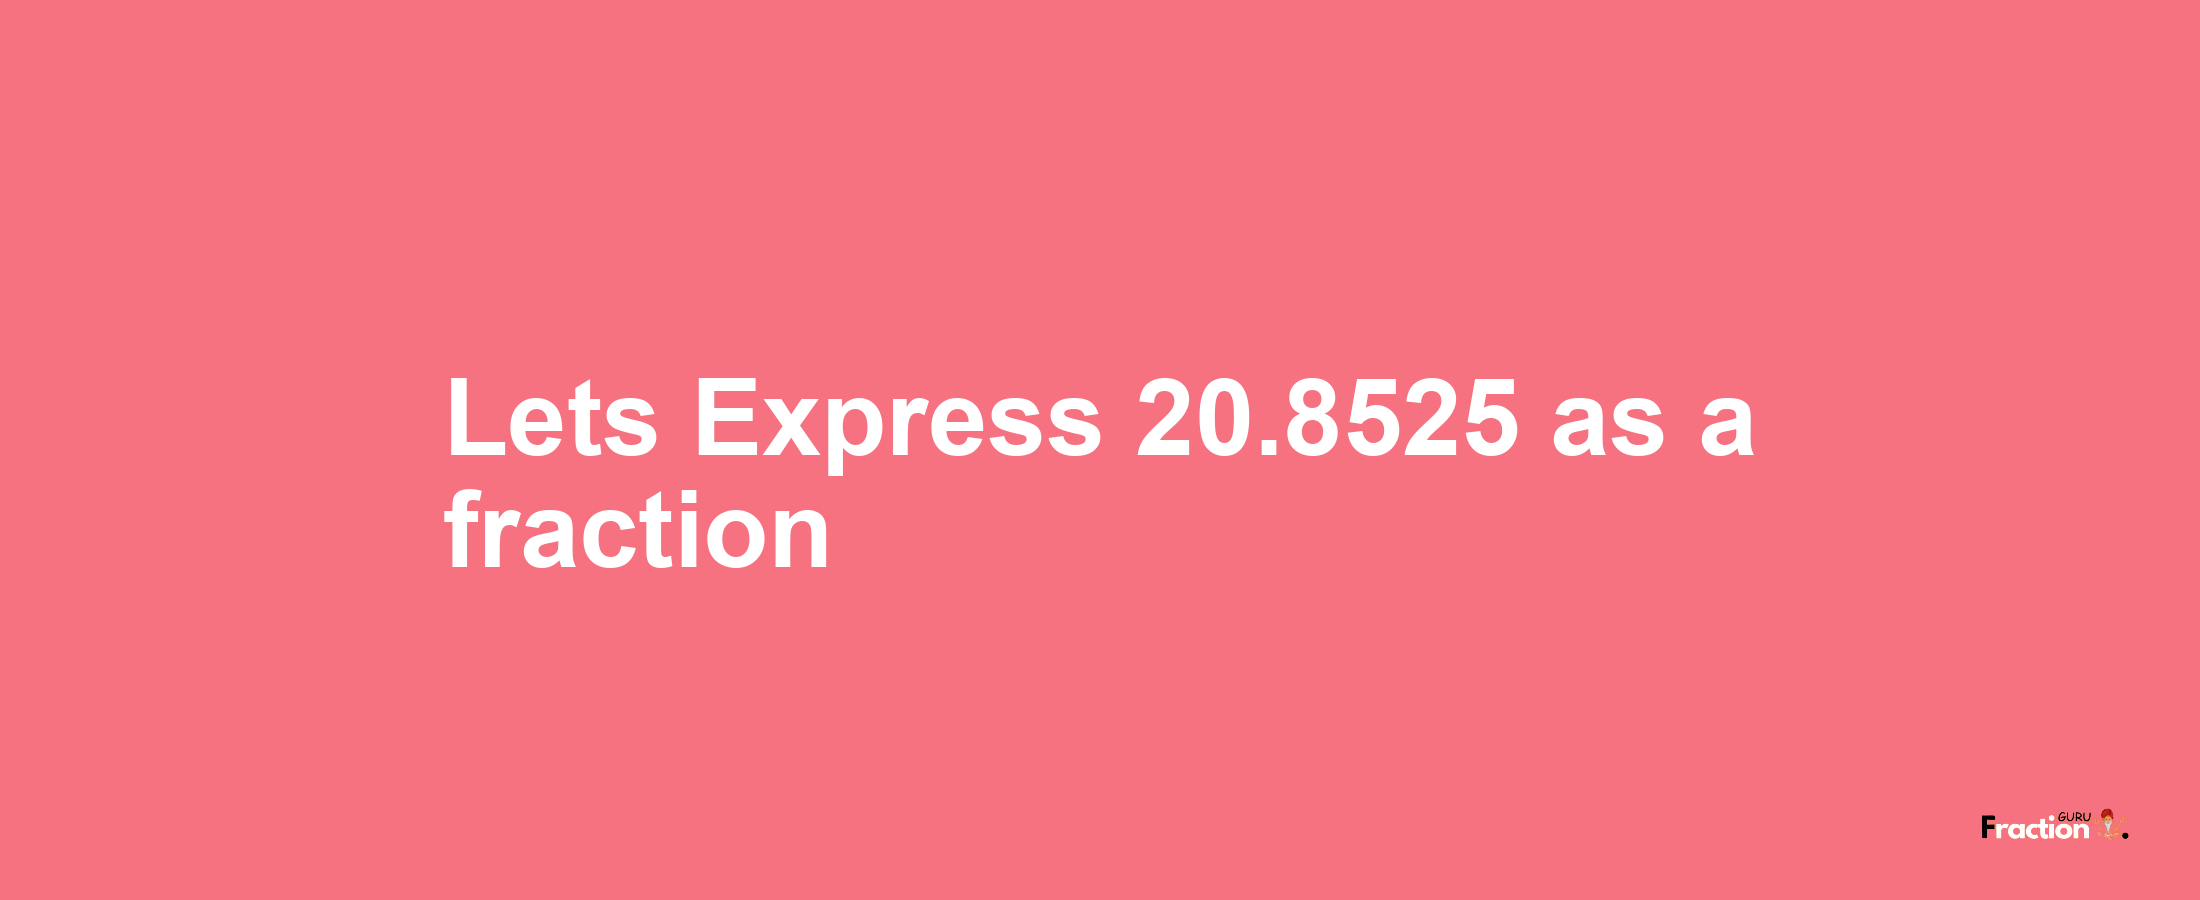 Lets Express 20.8525 as afraction